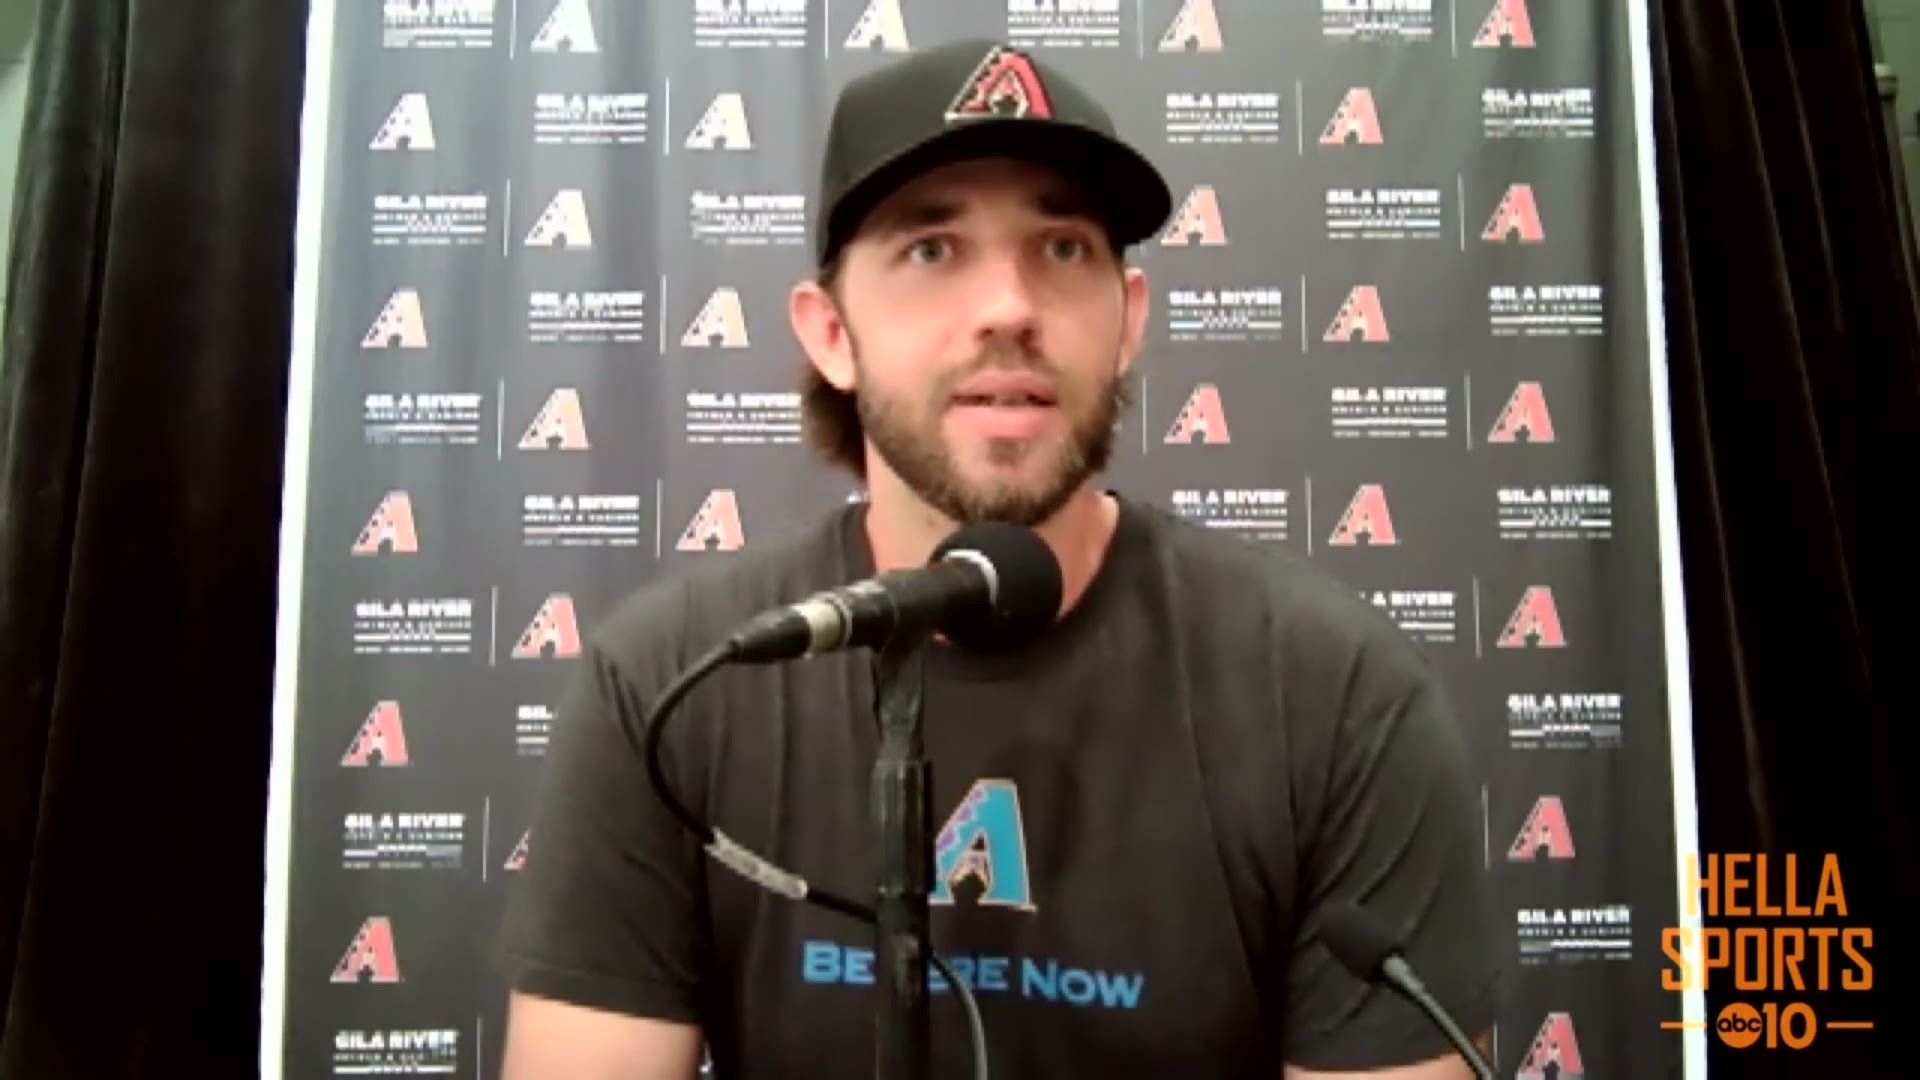 Arizona Diamondbacks pitcher Madison Bumgarner discusses his upcoming first start in San Francisco against his former Giants team as a member of the opposition.